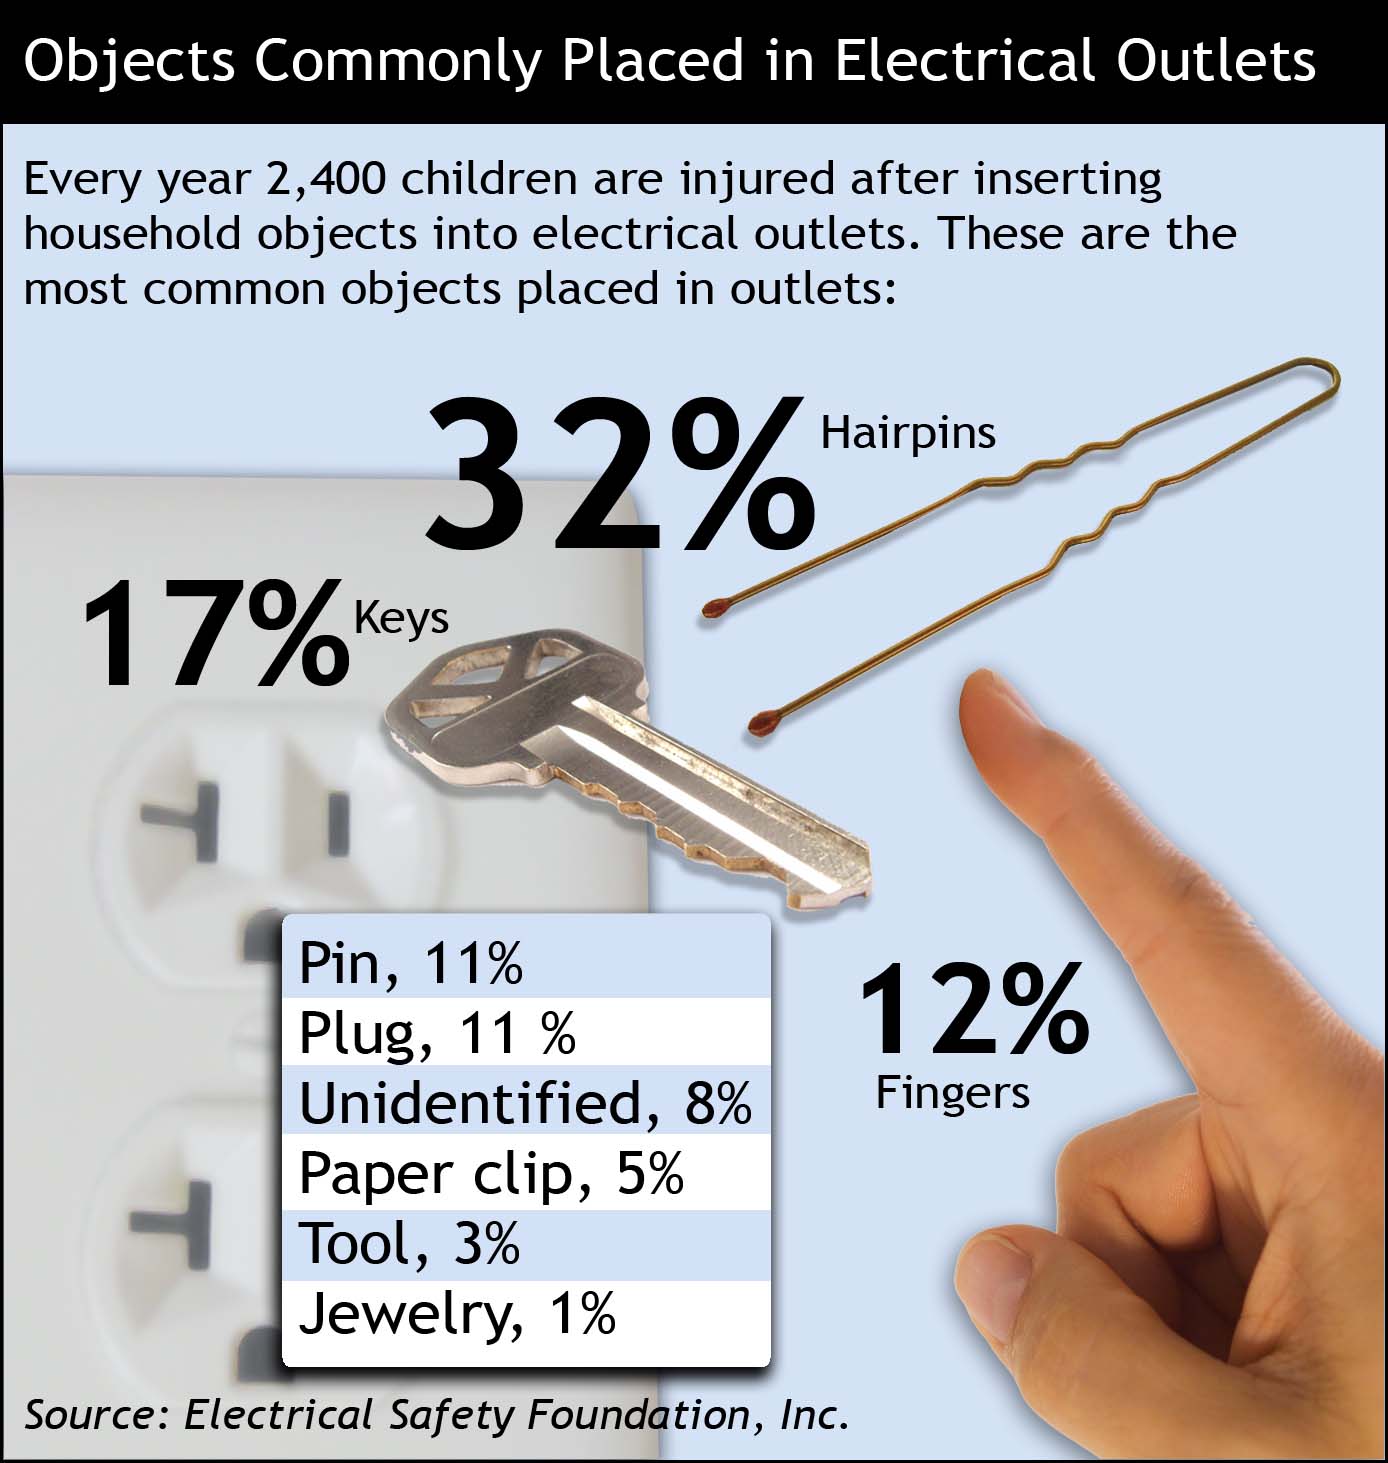 Do not insert household objects into electrical outlets